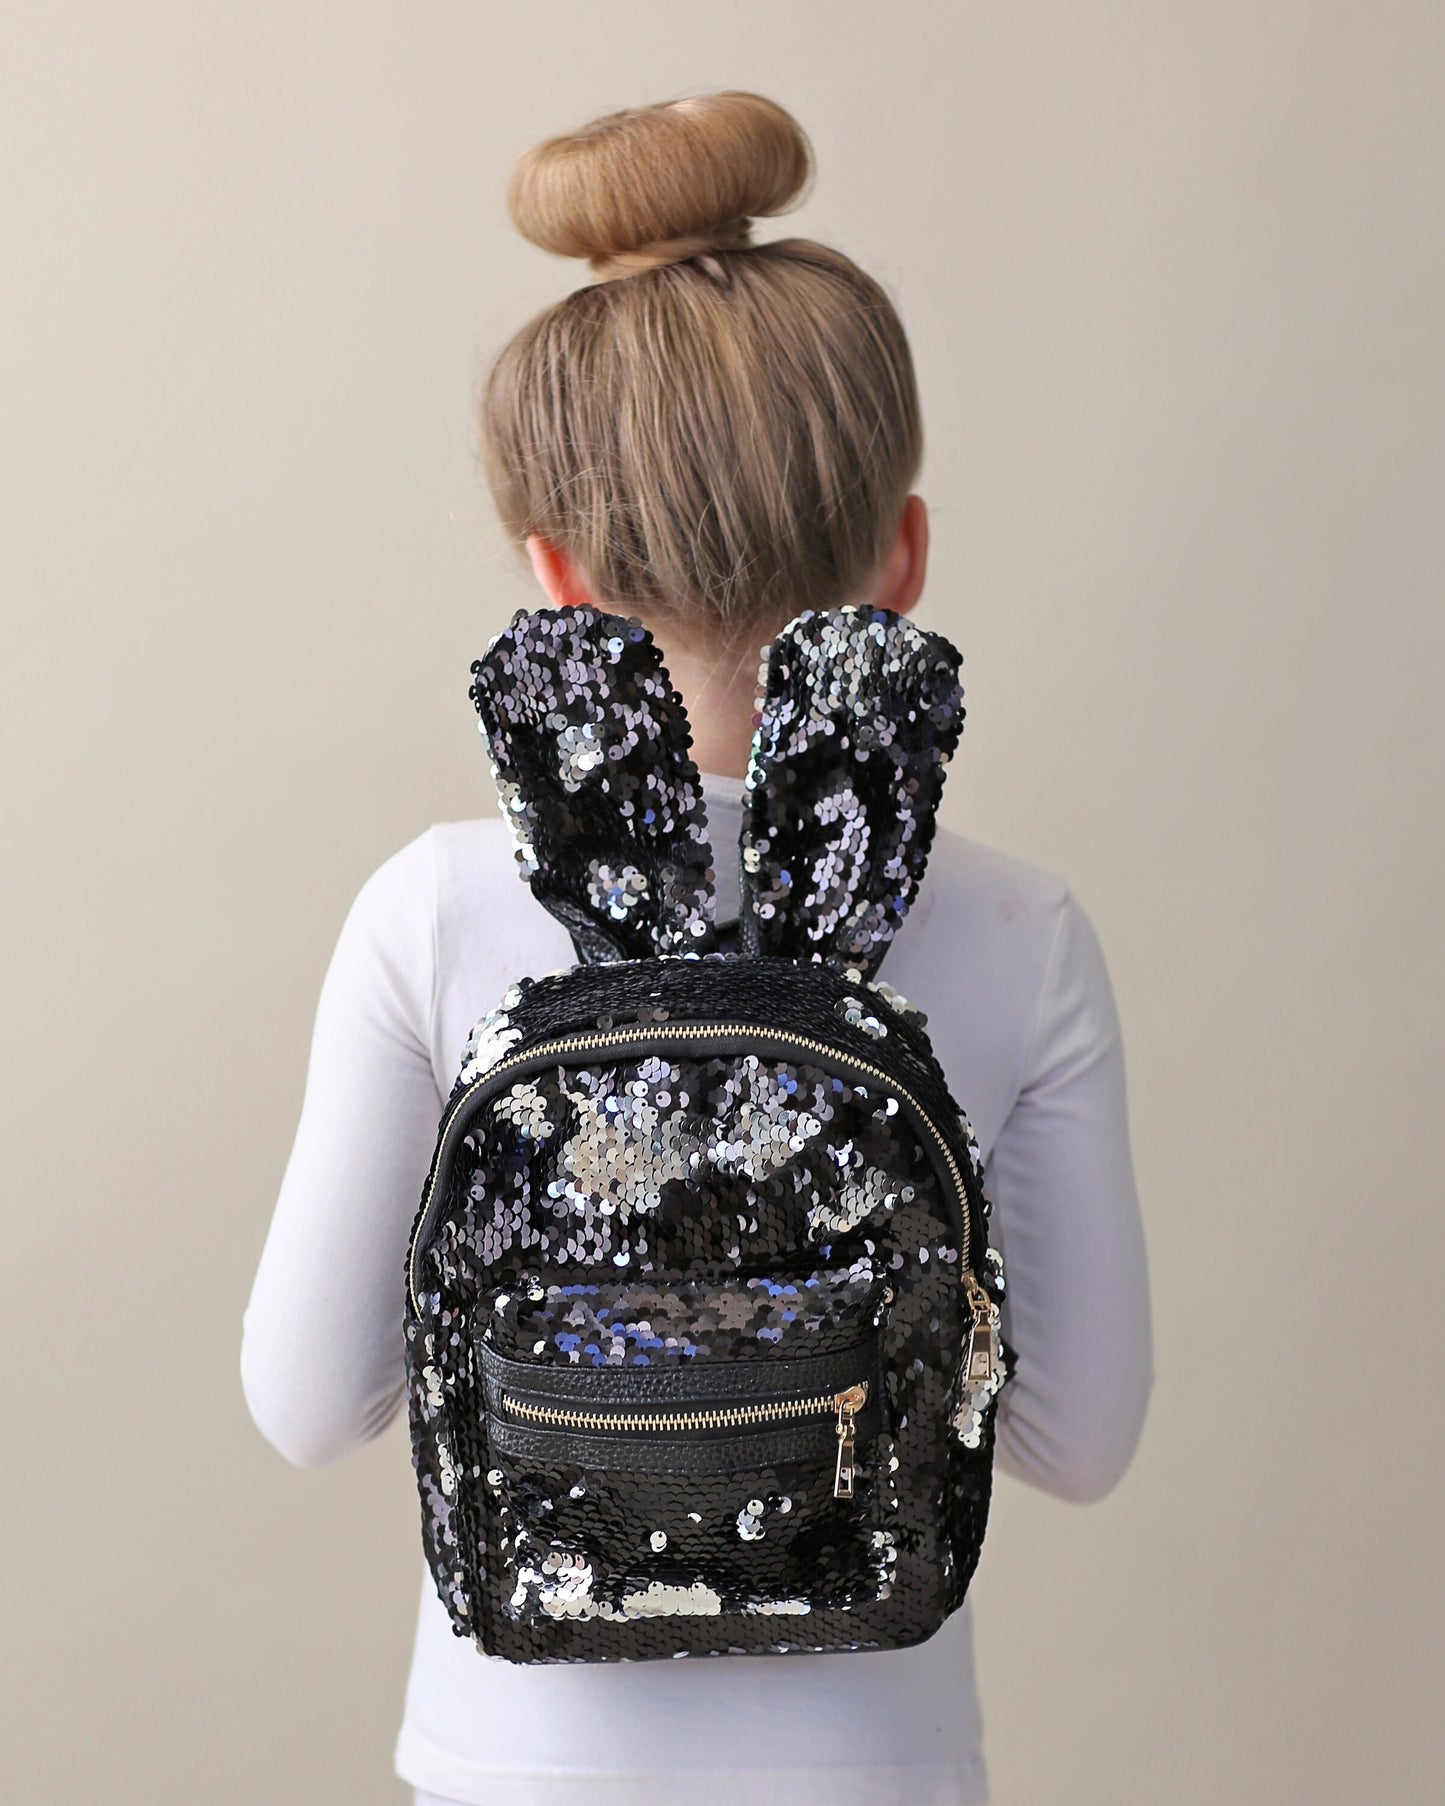 Black and Silver Bunny Backpack - Bunny Backpack - Bunny Bag - Reversible Sequin Backpack - Sequin Backpack - Sequin Bag